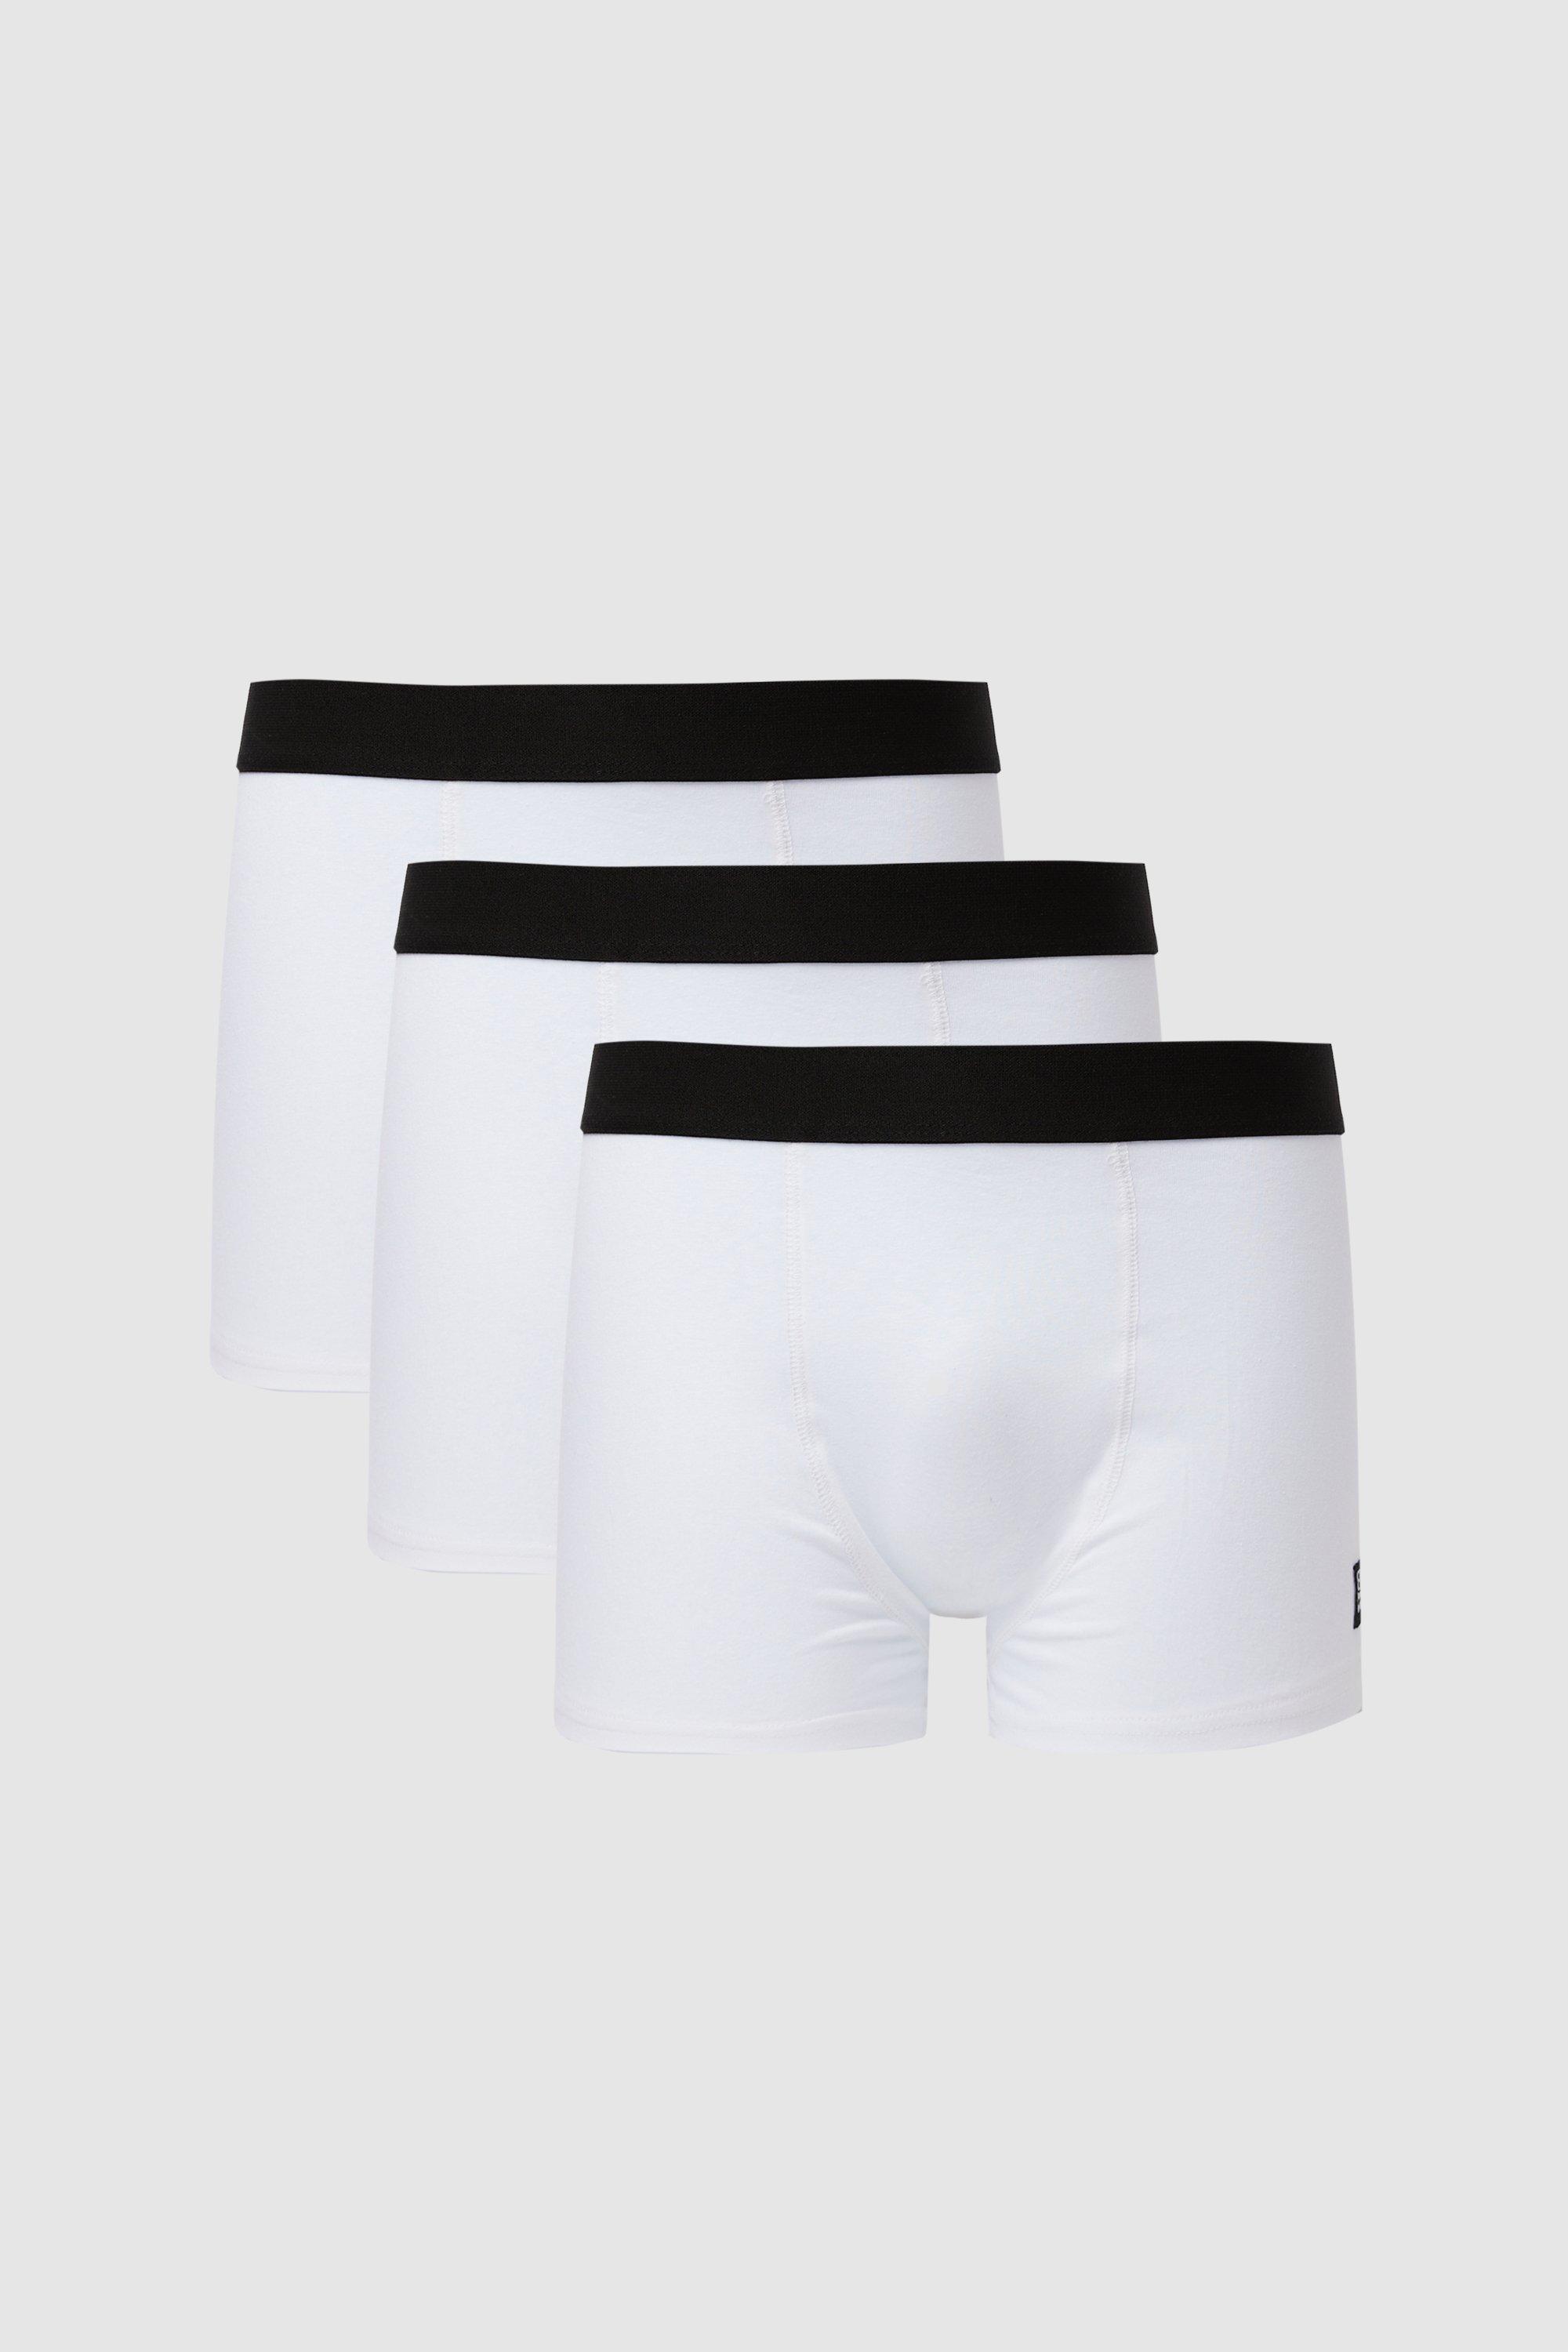 Mens 3 Pack Cotton Trunks from Burton